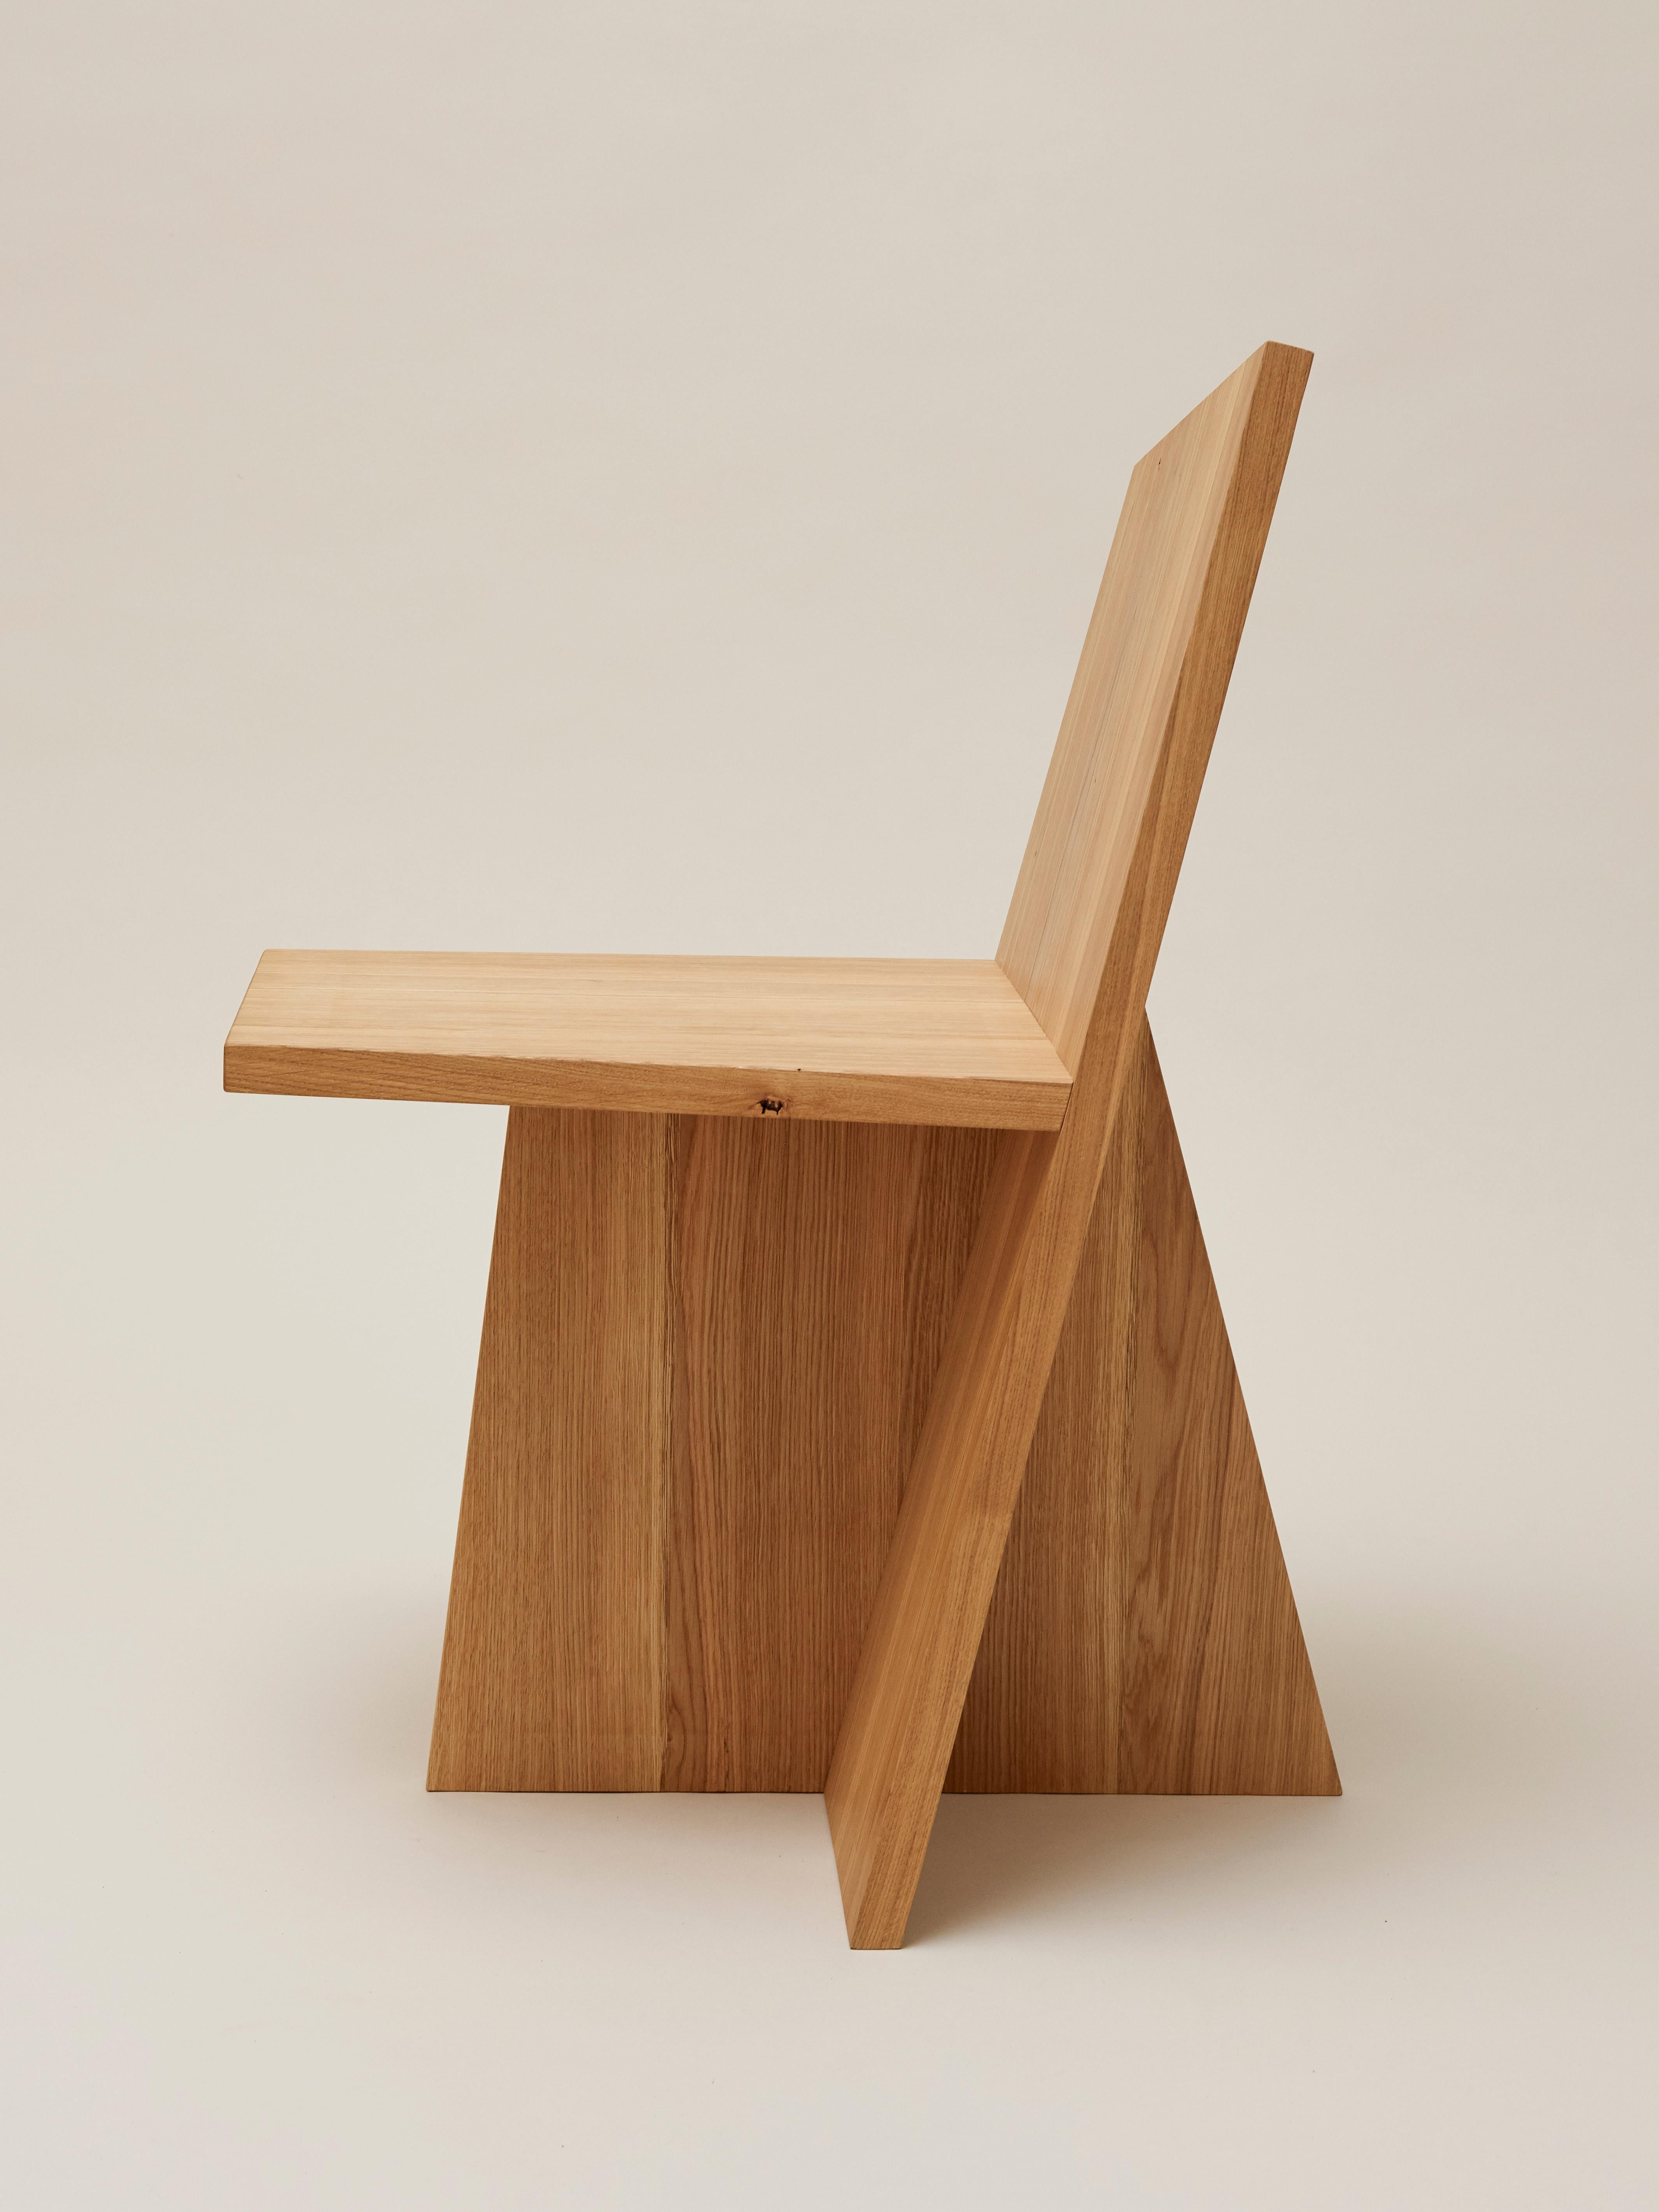 Crooked dining chair by Nazara Lázaro
Dimensions: H 86 x W 53 x D 58 cm 
 Seat height: 45 cm
Materials: Massive oak with oil wax surface

All pieces are available in natural massive oak, walnut and white lacquered wood.
Additional sizes, woods